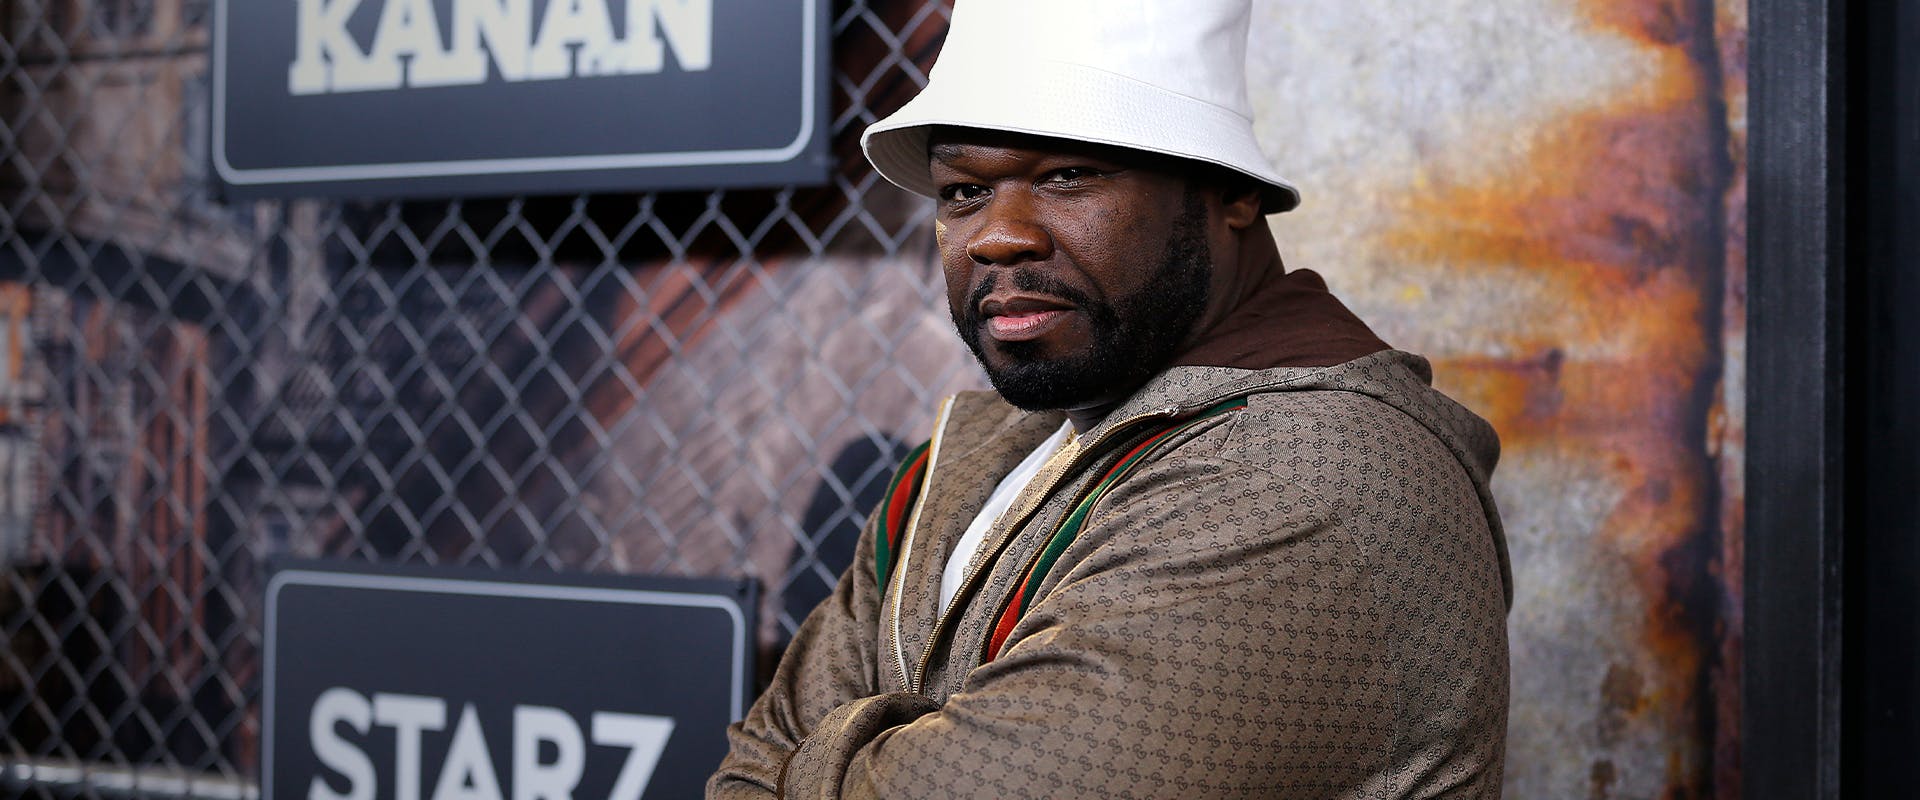 50 Cent attends the "Power Book III: Raising Kanan" New York premiere at the Hammerstein Ballroom on July 15, 2021 in New York City.